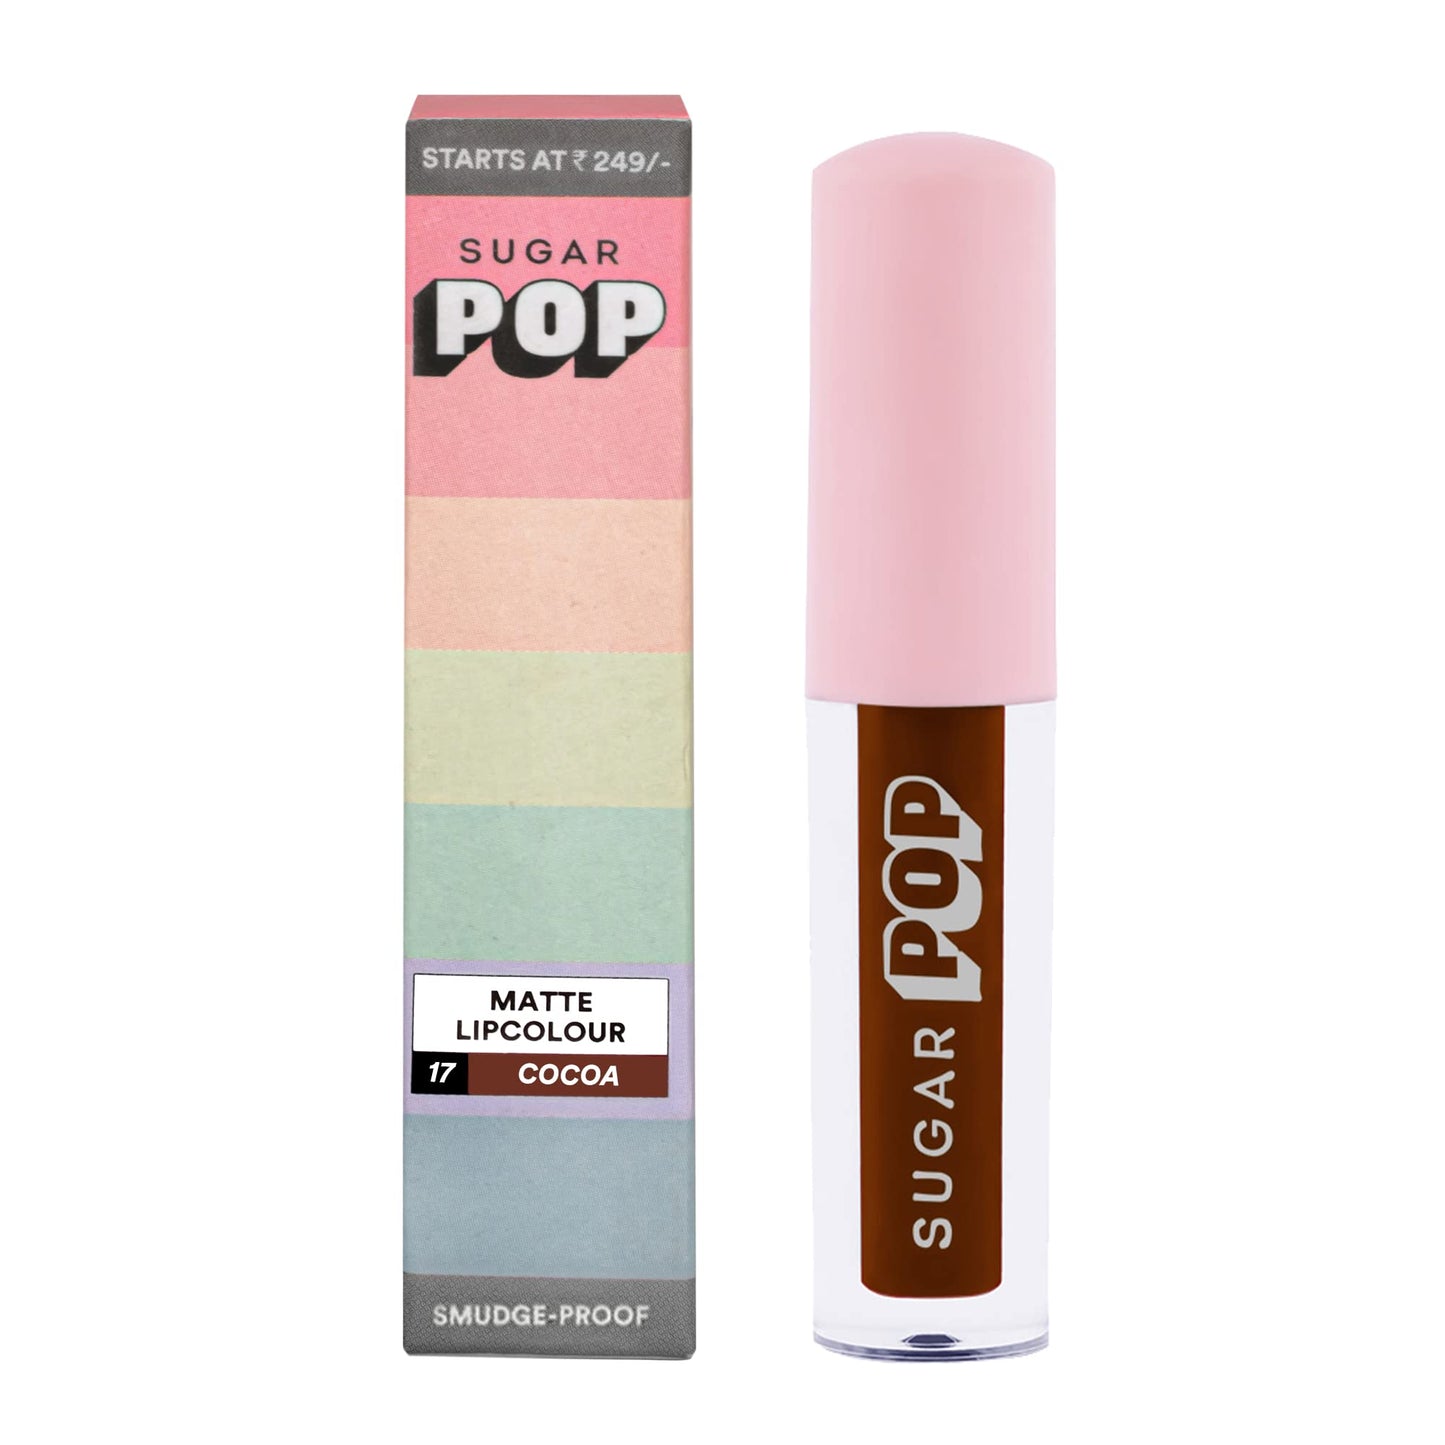 SUGAR POP 2 in 1 Matte Lipcolour Combo, Richly pigmented, Long-lasting, Ultra Matte, Smudge-Proof, 10 Rosewood & 17 Cocoa, Super Lip Kit Combo